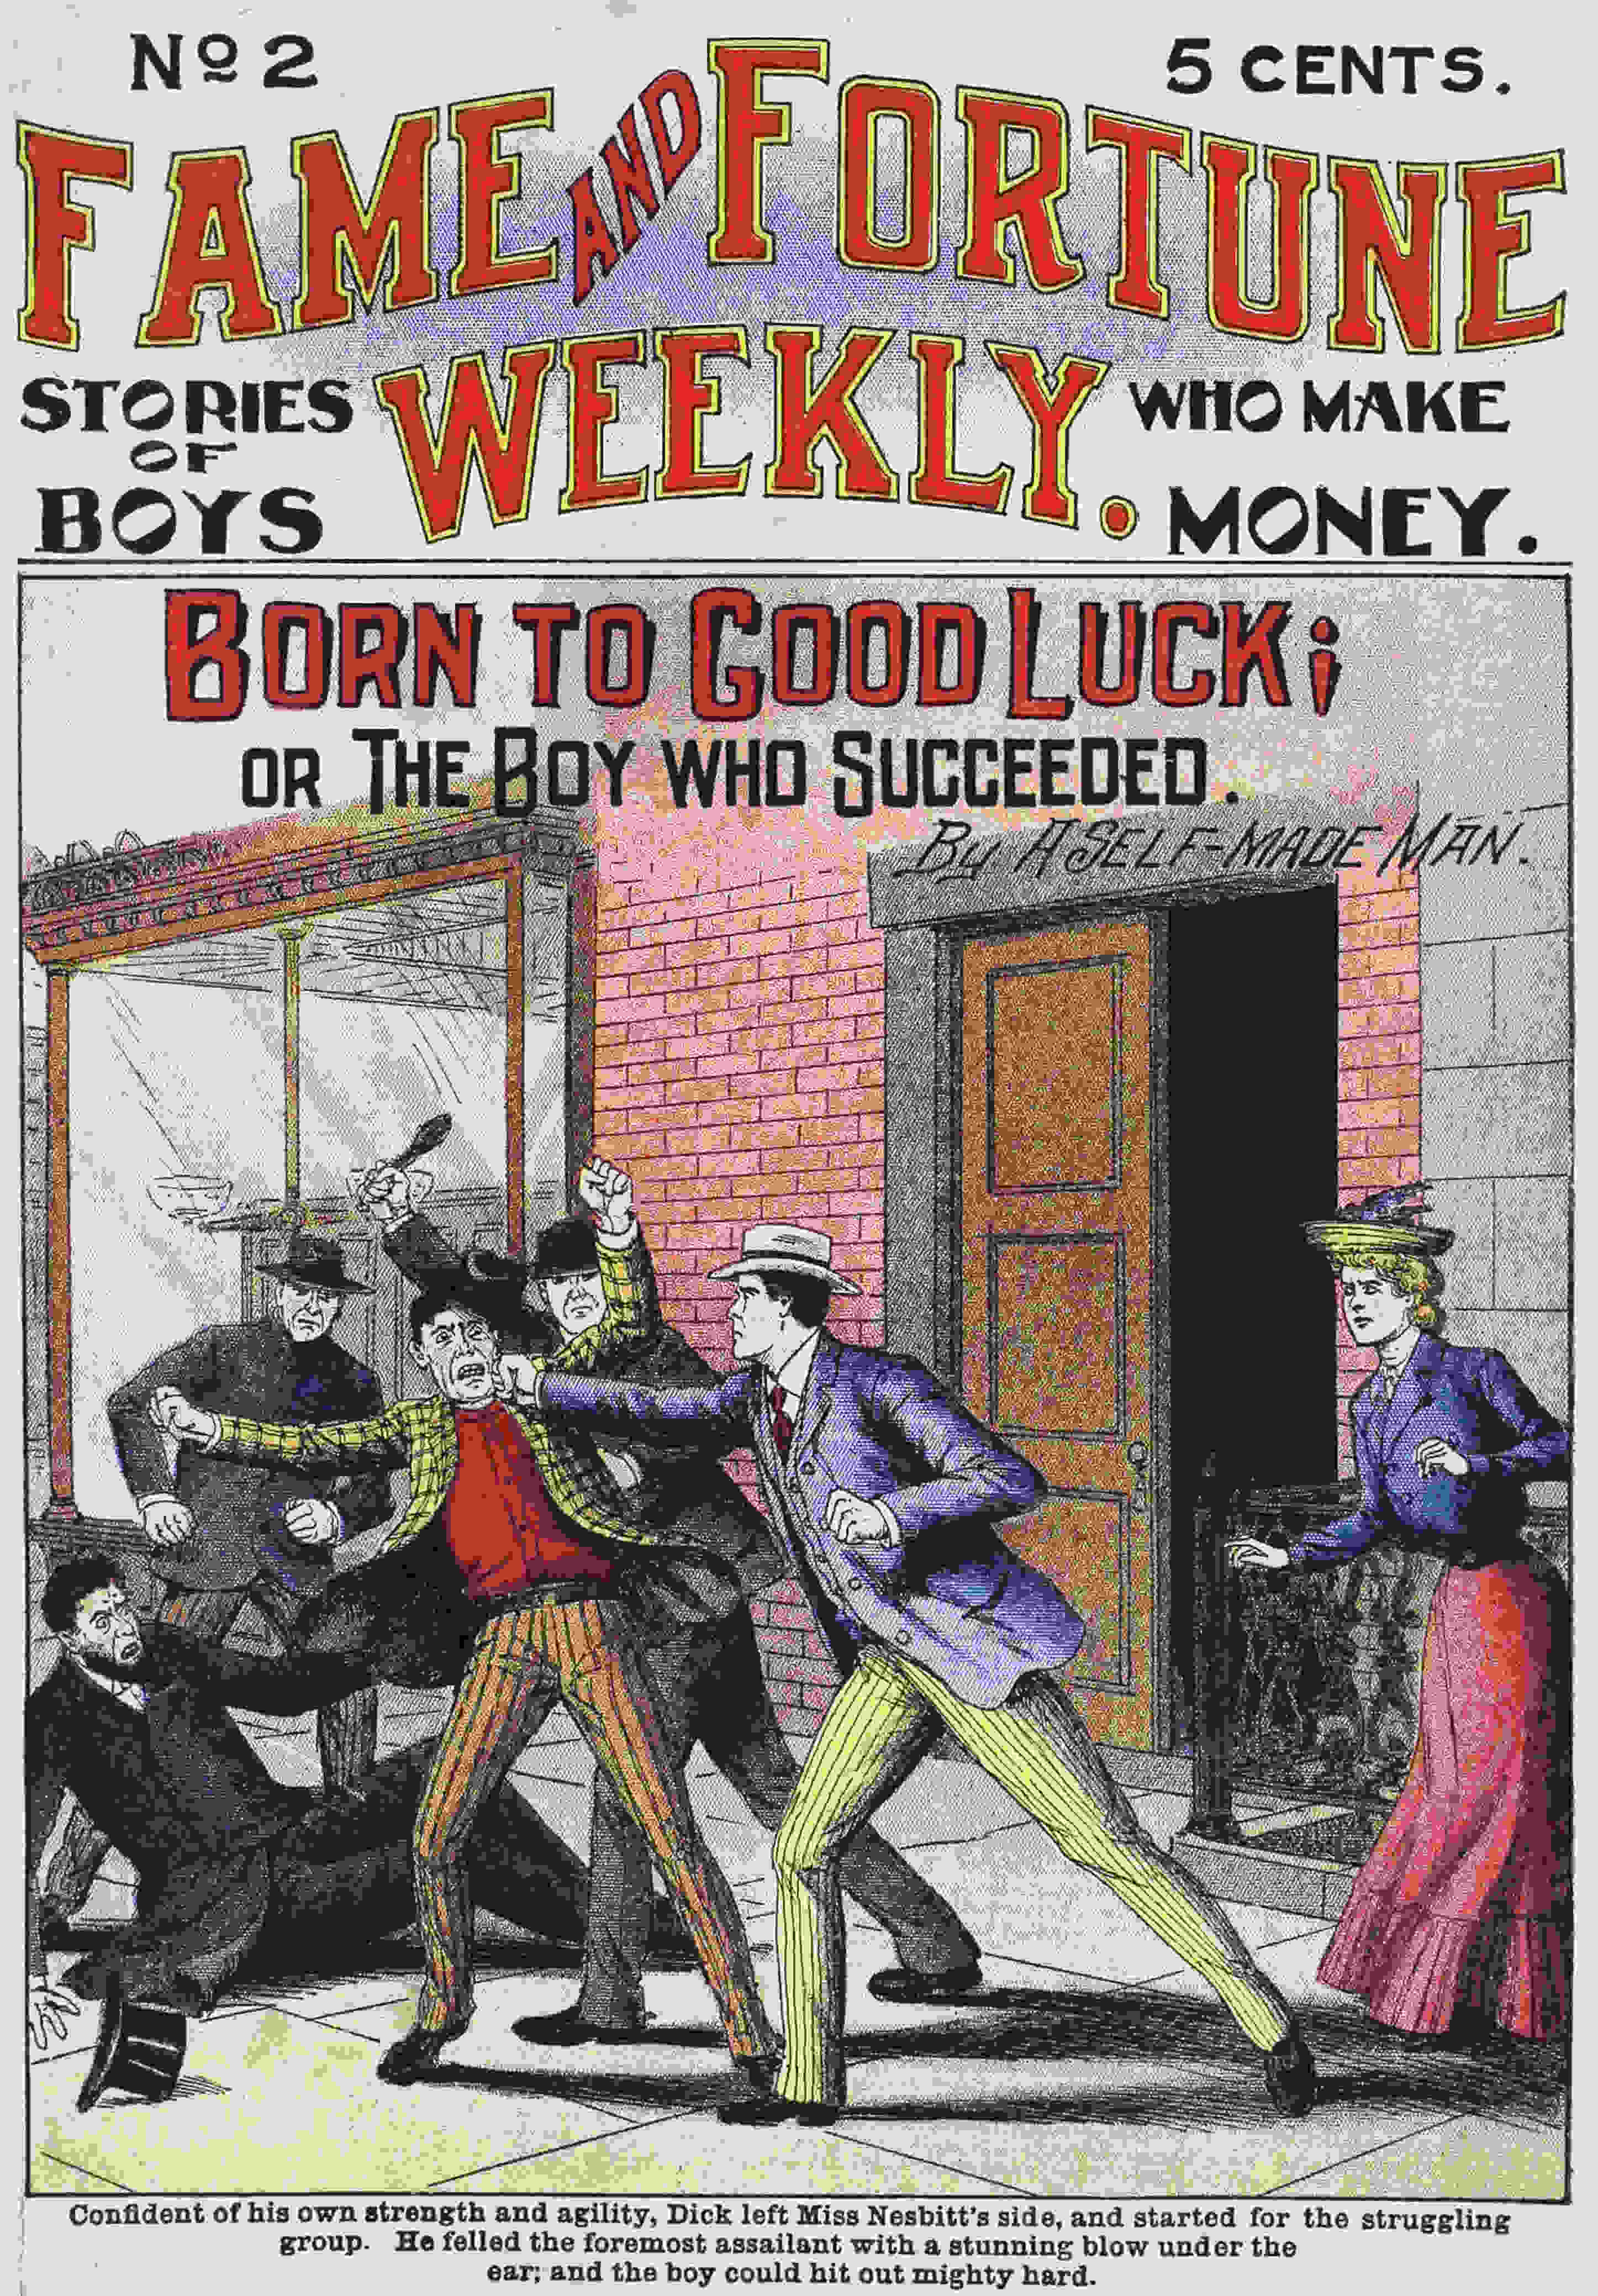 Fame and Fortune Weekly No, 2, Born to Good Luck; or The Boy Who Succeeded, by A Self-Made Man —A Project Gutenberg eBook